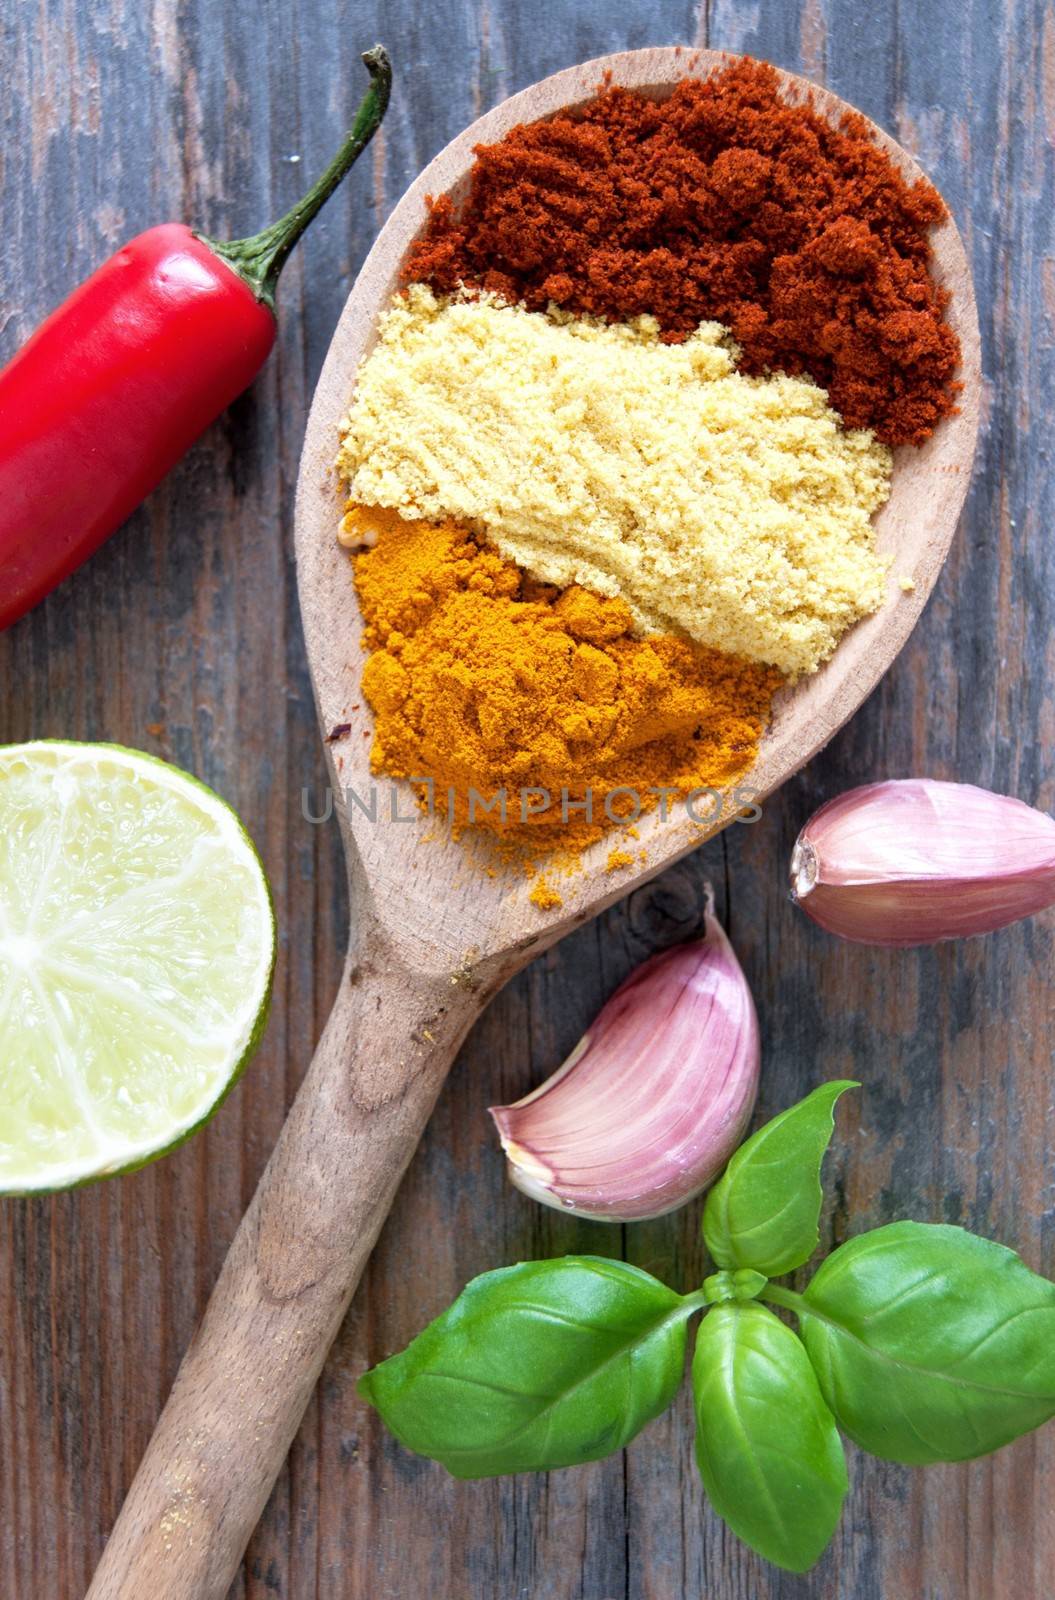 Mix of herbs in a wooden spoon with seasoning ingredients on the side